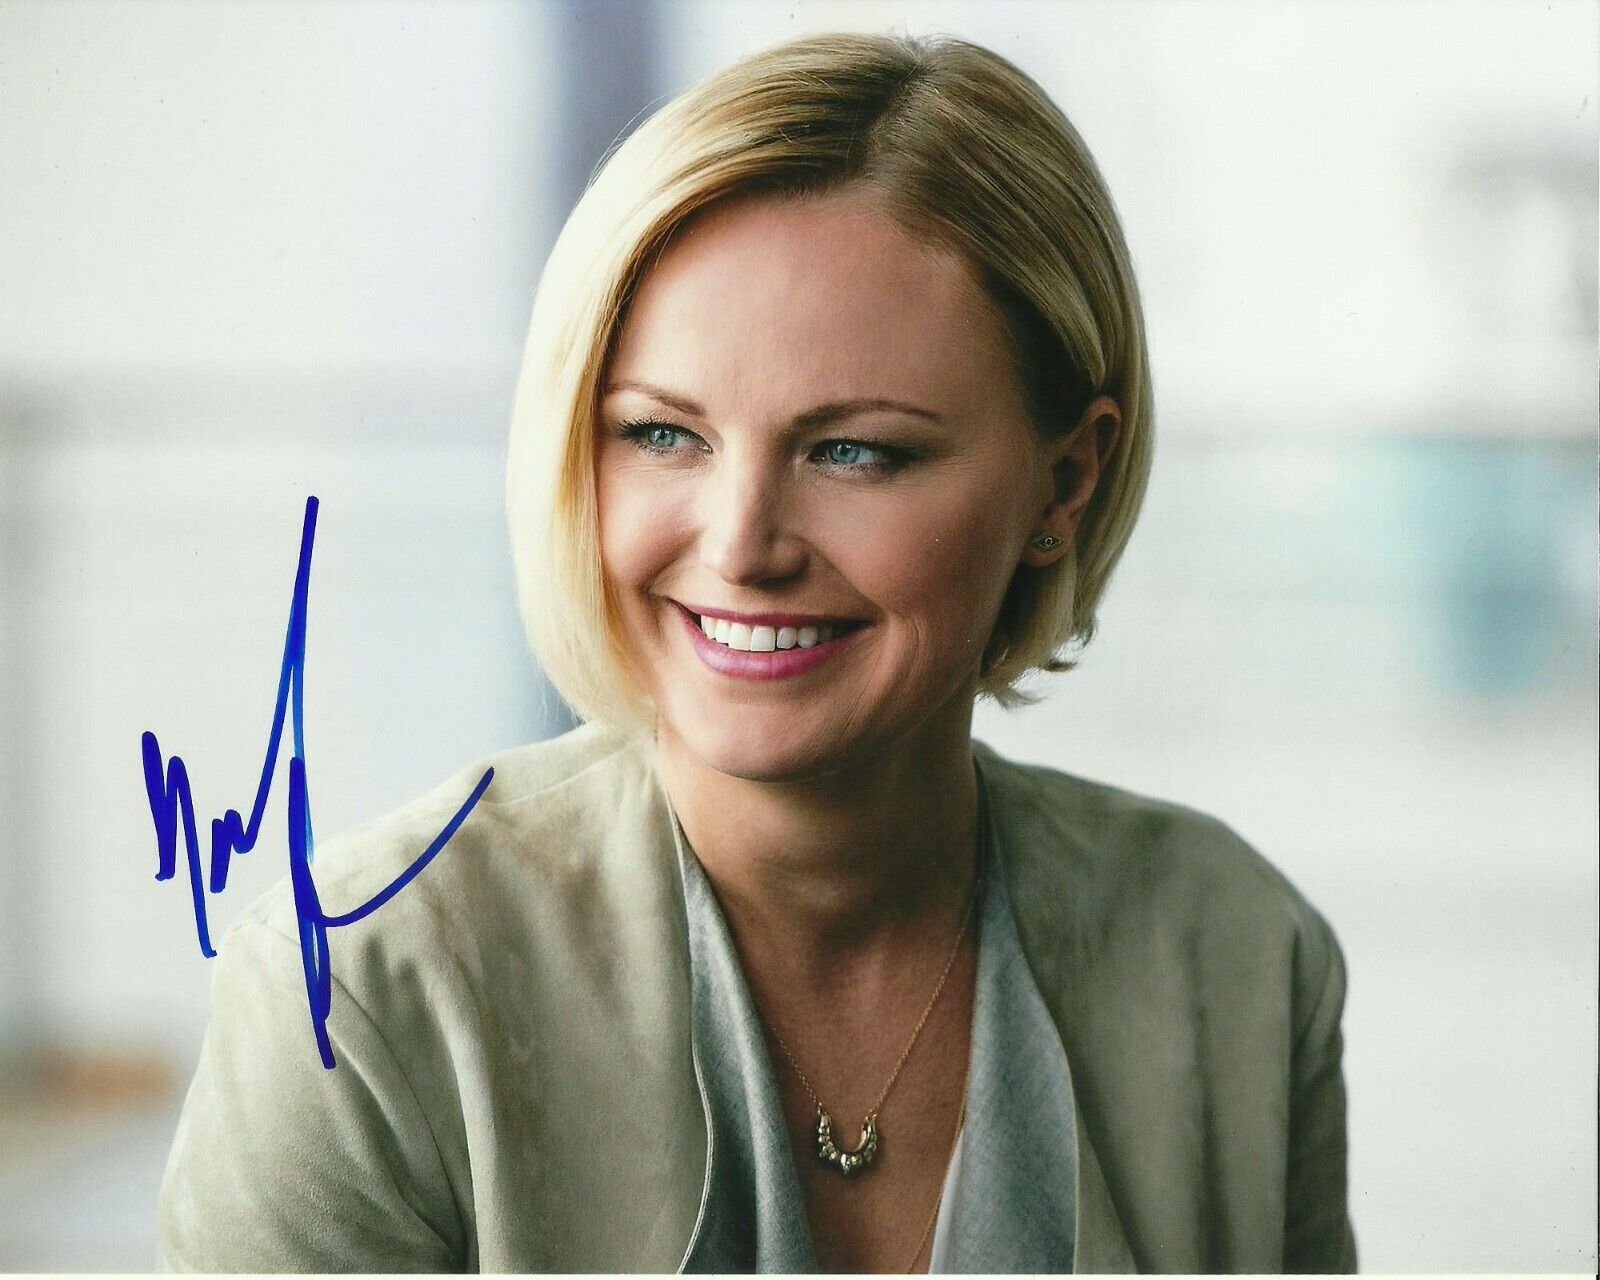 MALIN AKERMAN SIGNED SEXY Photo Poster painting UACC REG 242 FILM AUTOGRAPHS AUTHENTIC (9)